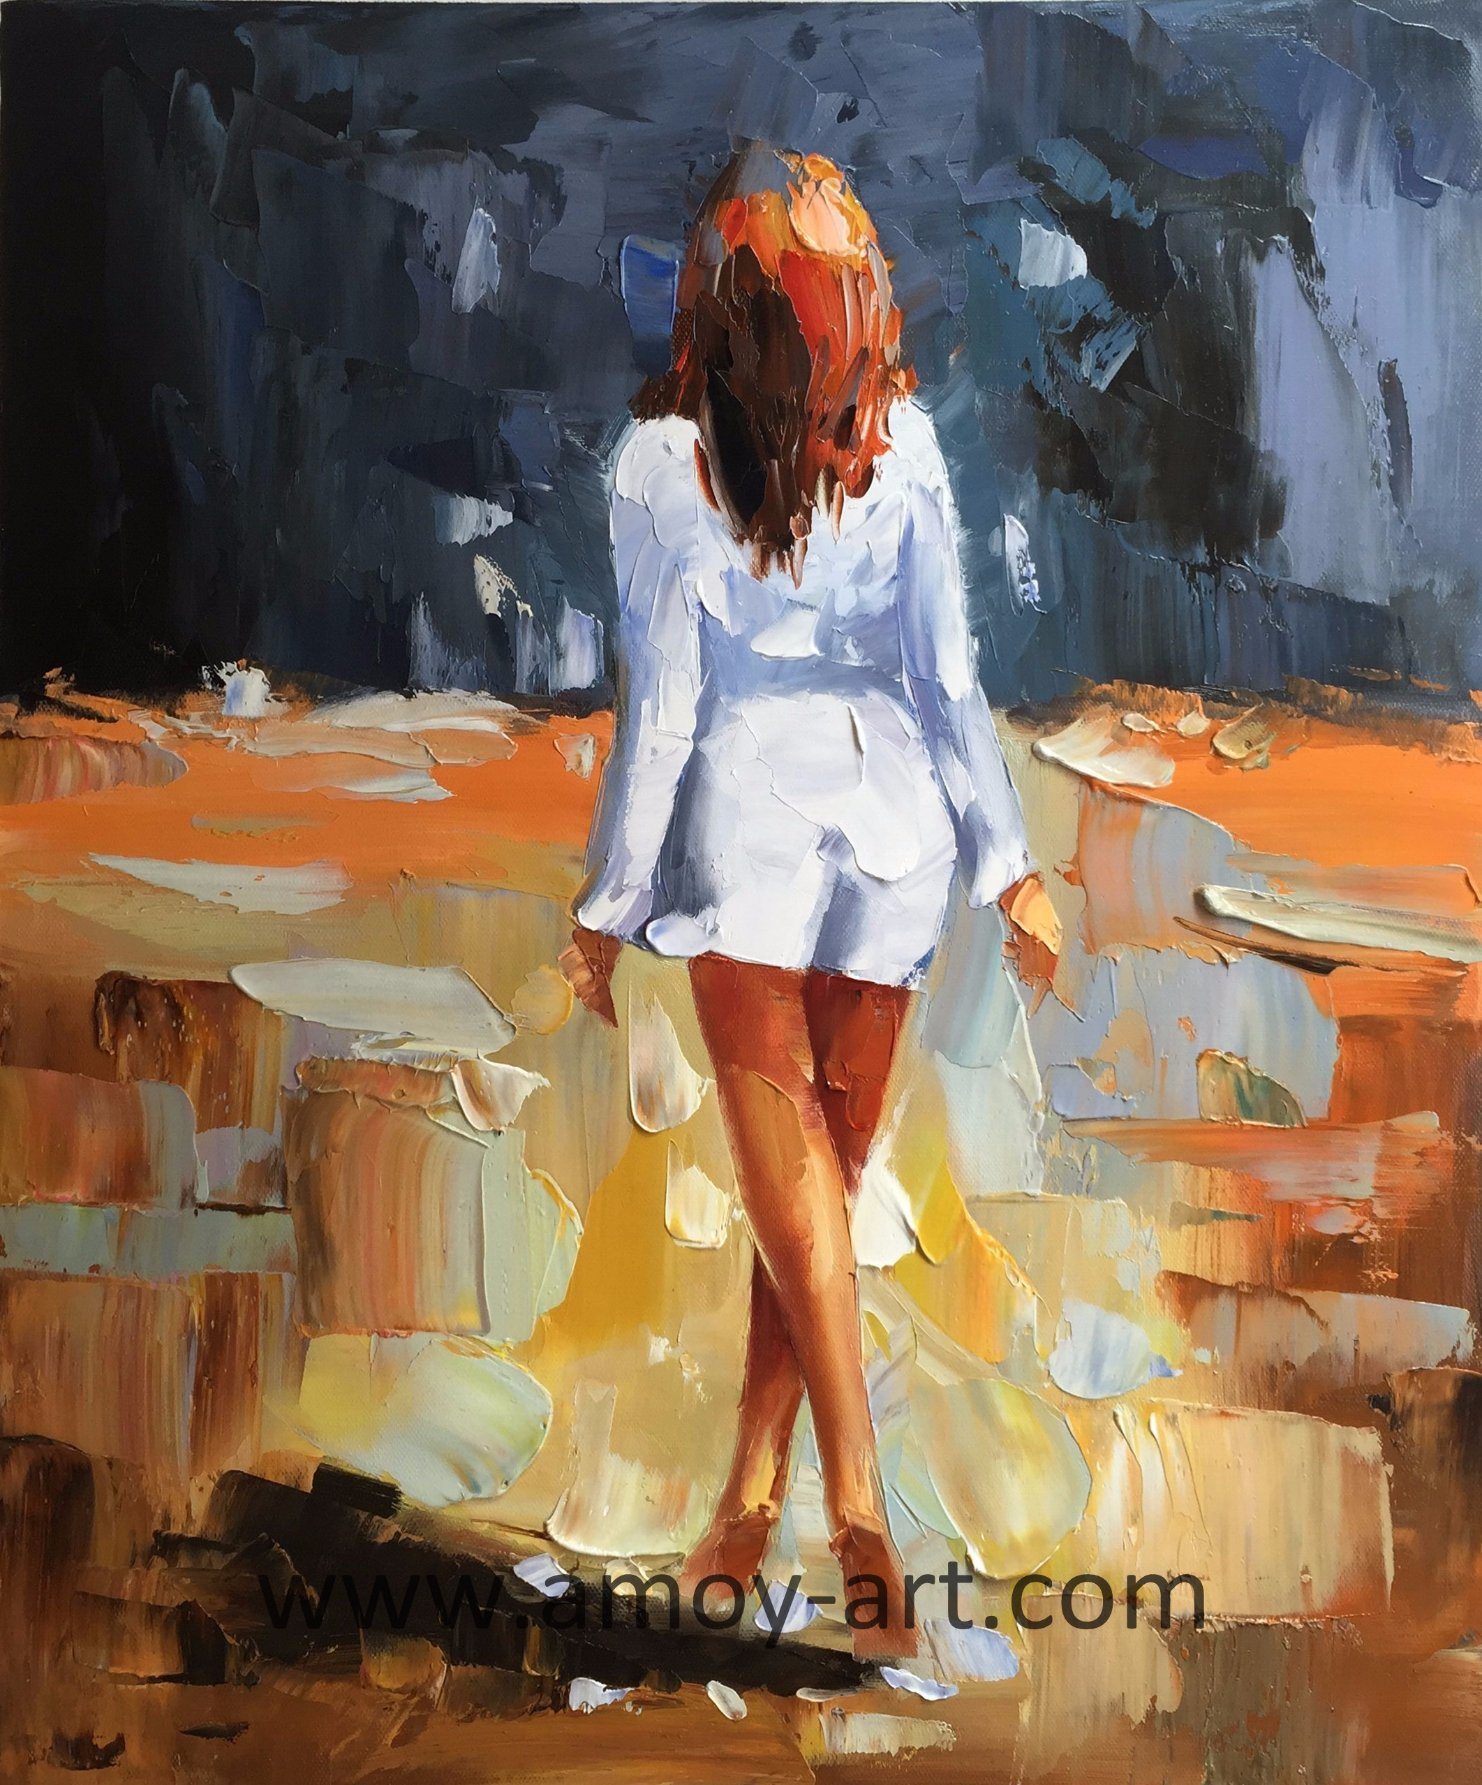 Handmade Impressive Figurative Oil Painting for Home Decoration